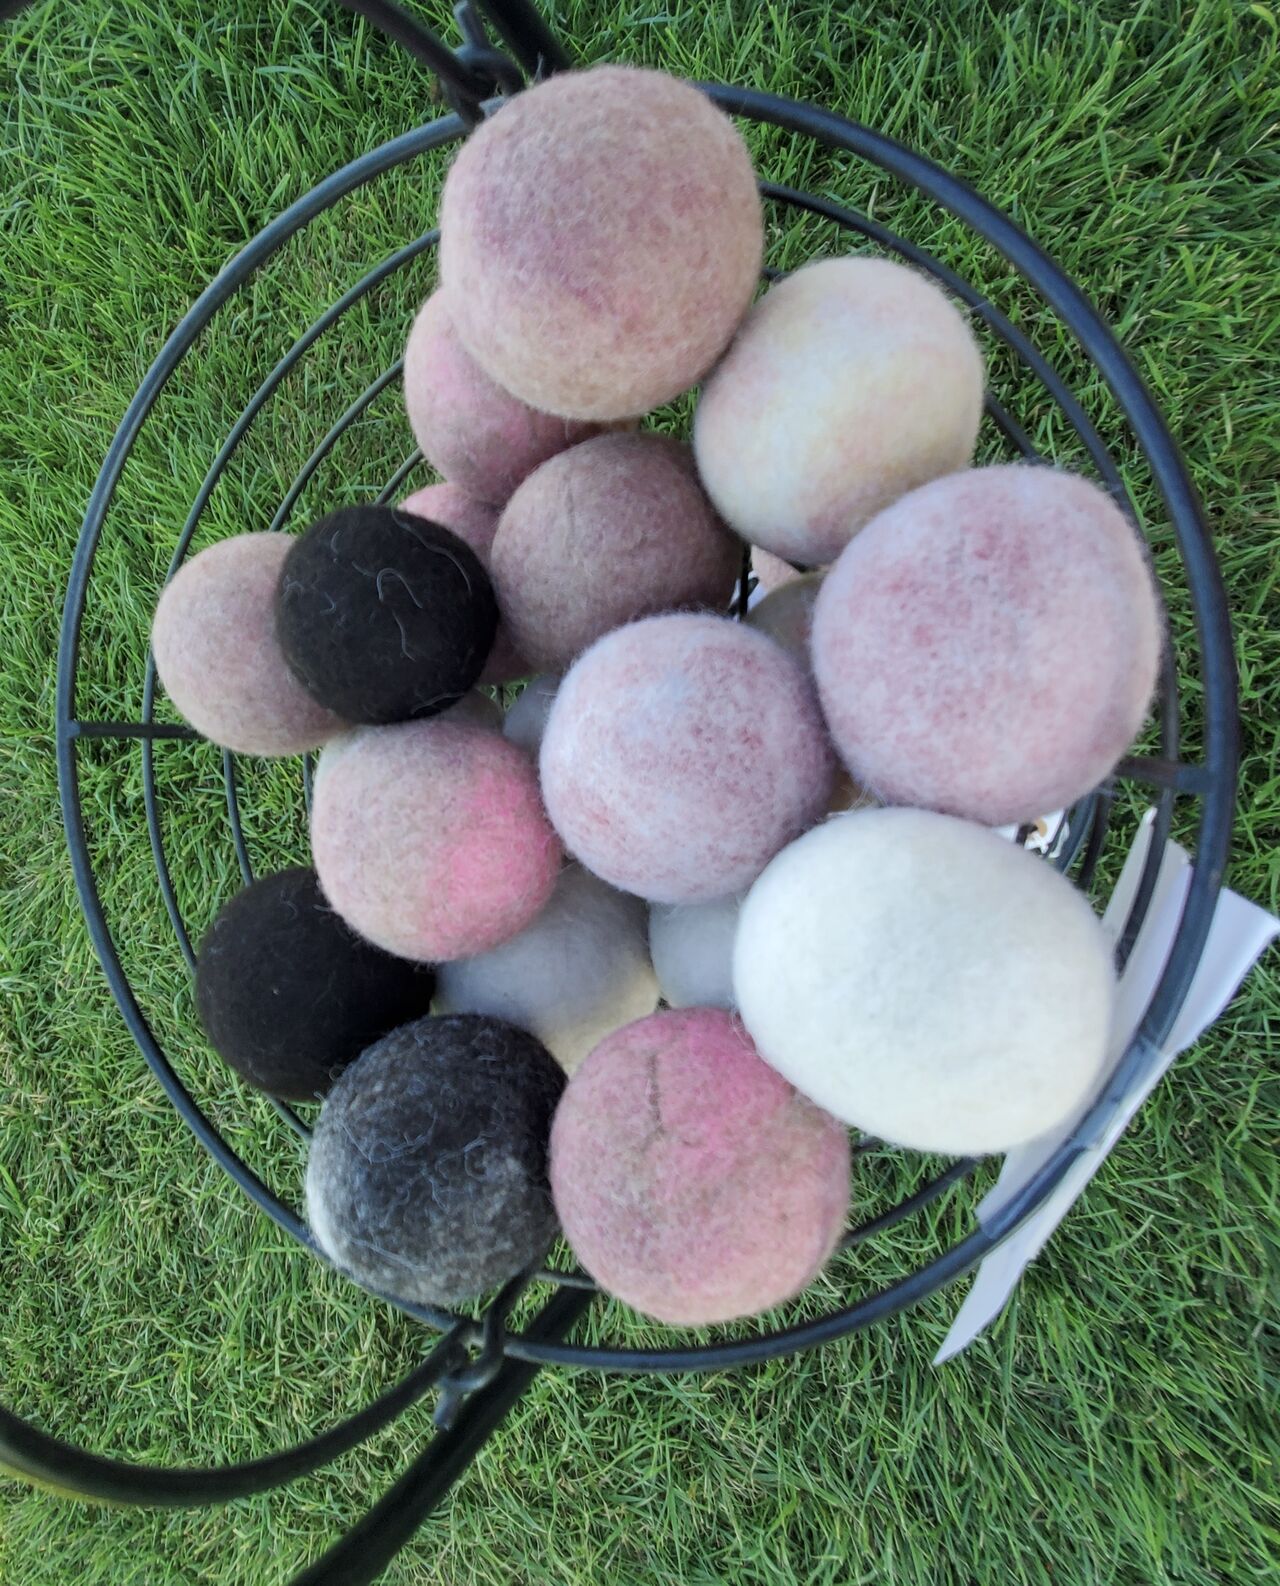 Dryer balls in a variety of colors